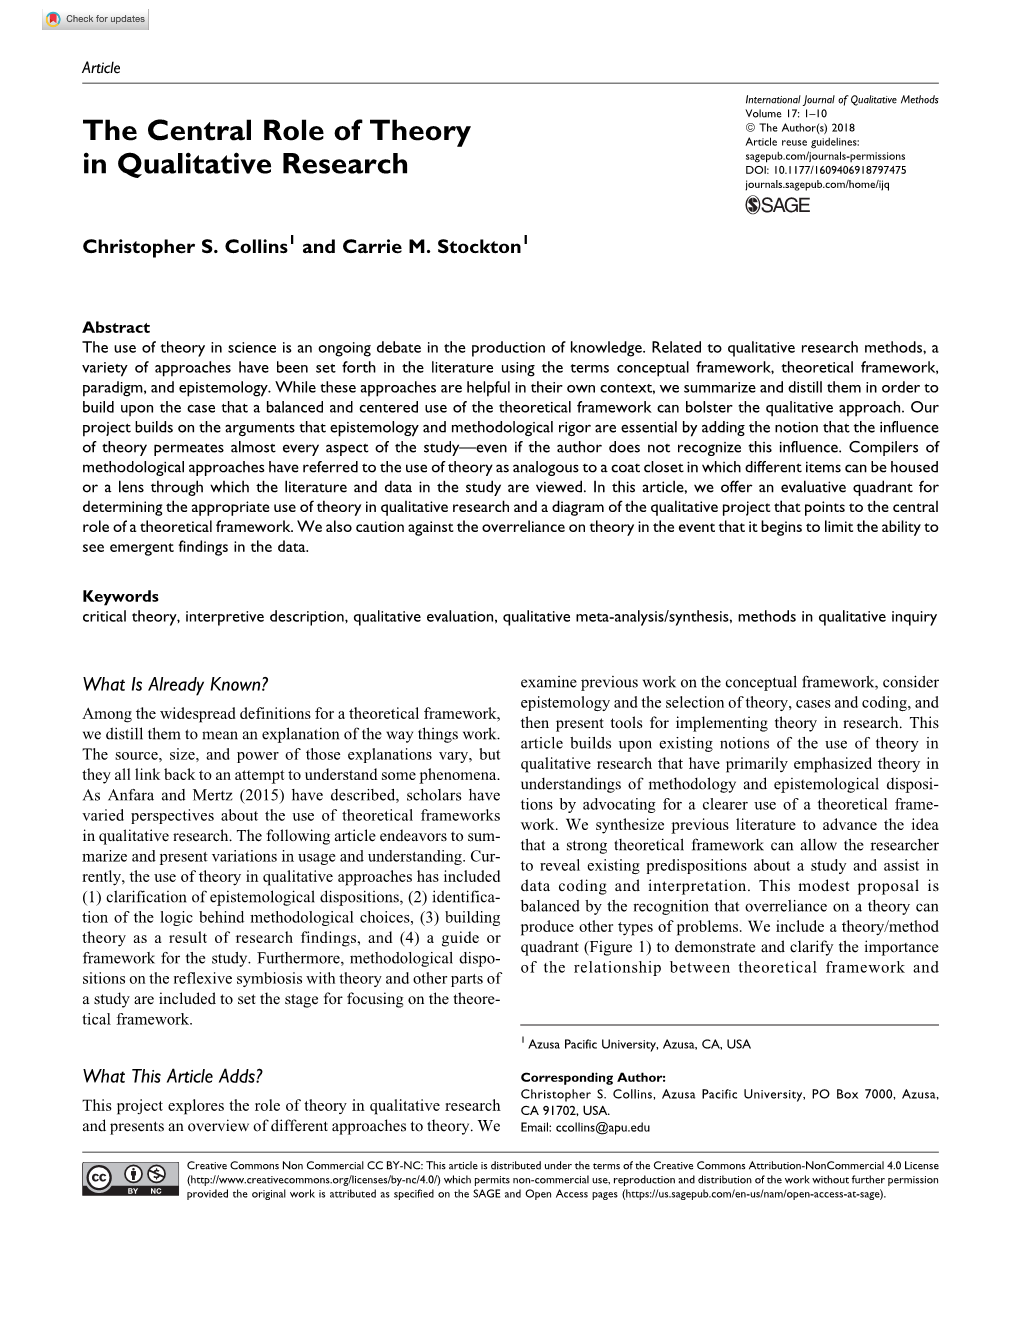 The Central Role of Theory in Qualitative Research